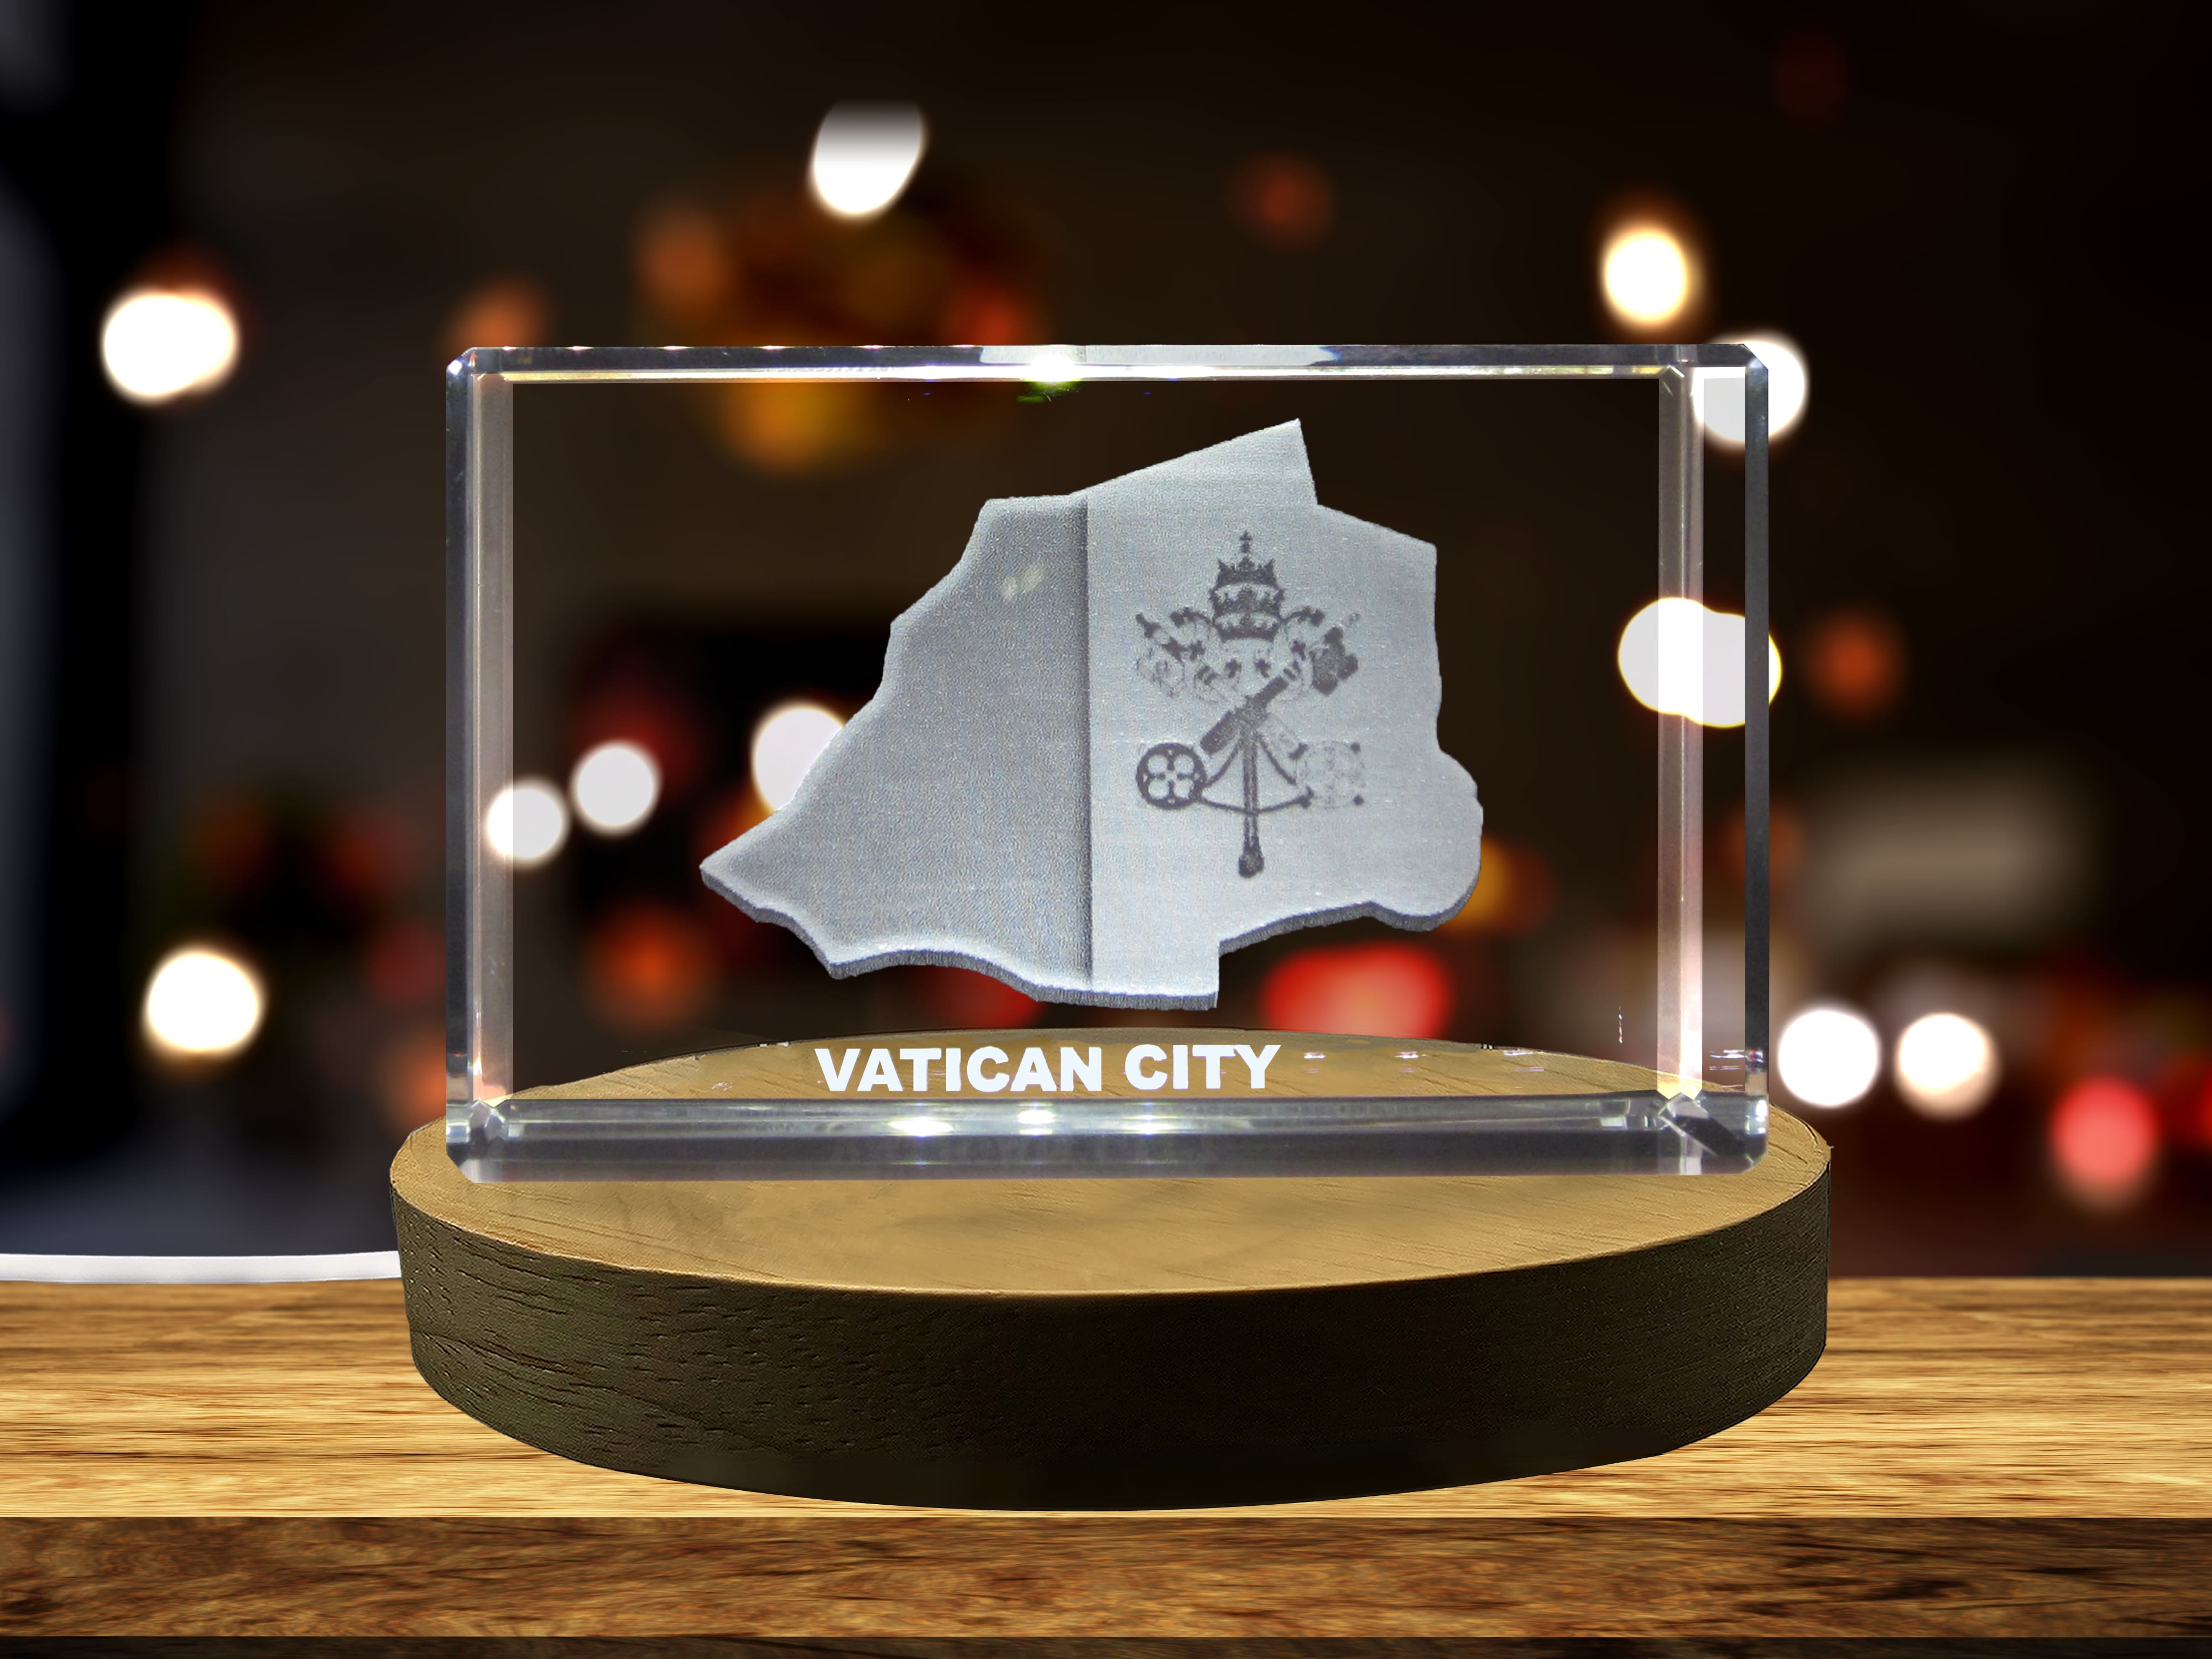 Holy See (Vatican City) 3D Engraved Crystal 3D Engraved Crystal Keepsake/Gift/Decor/Collectible/Souvenir A&B Crystal Collection